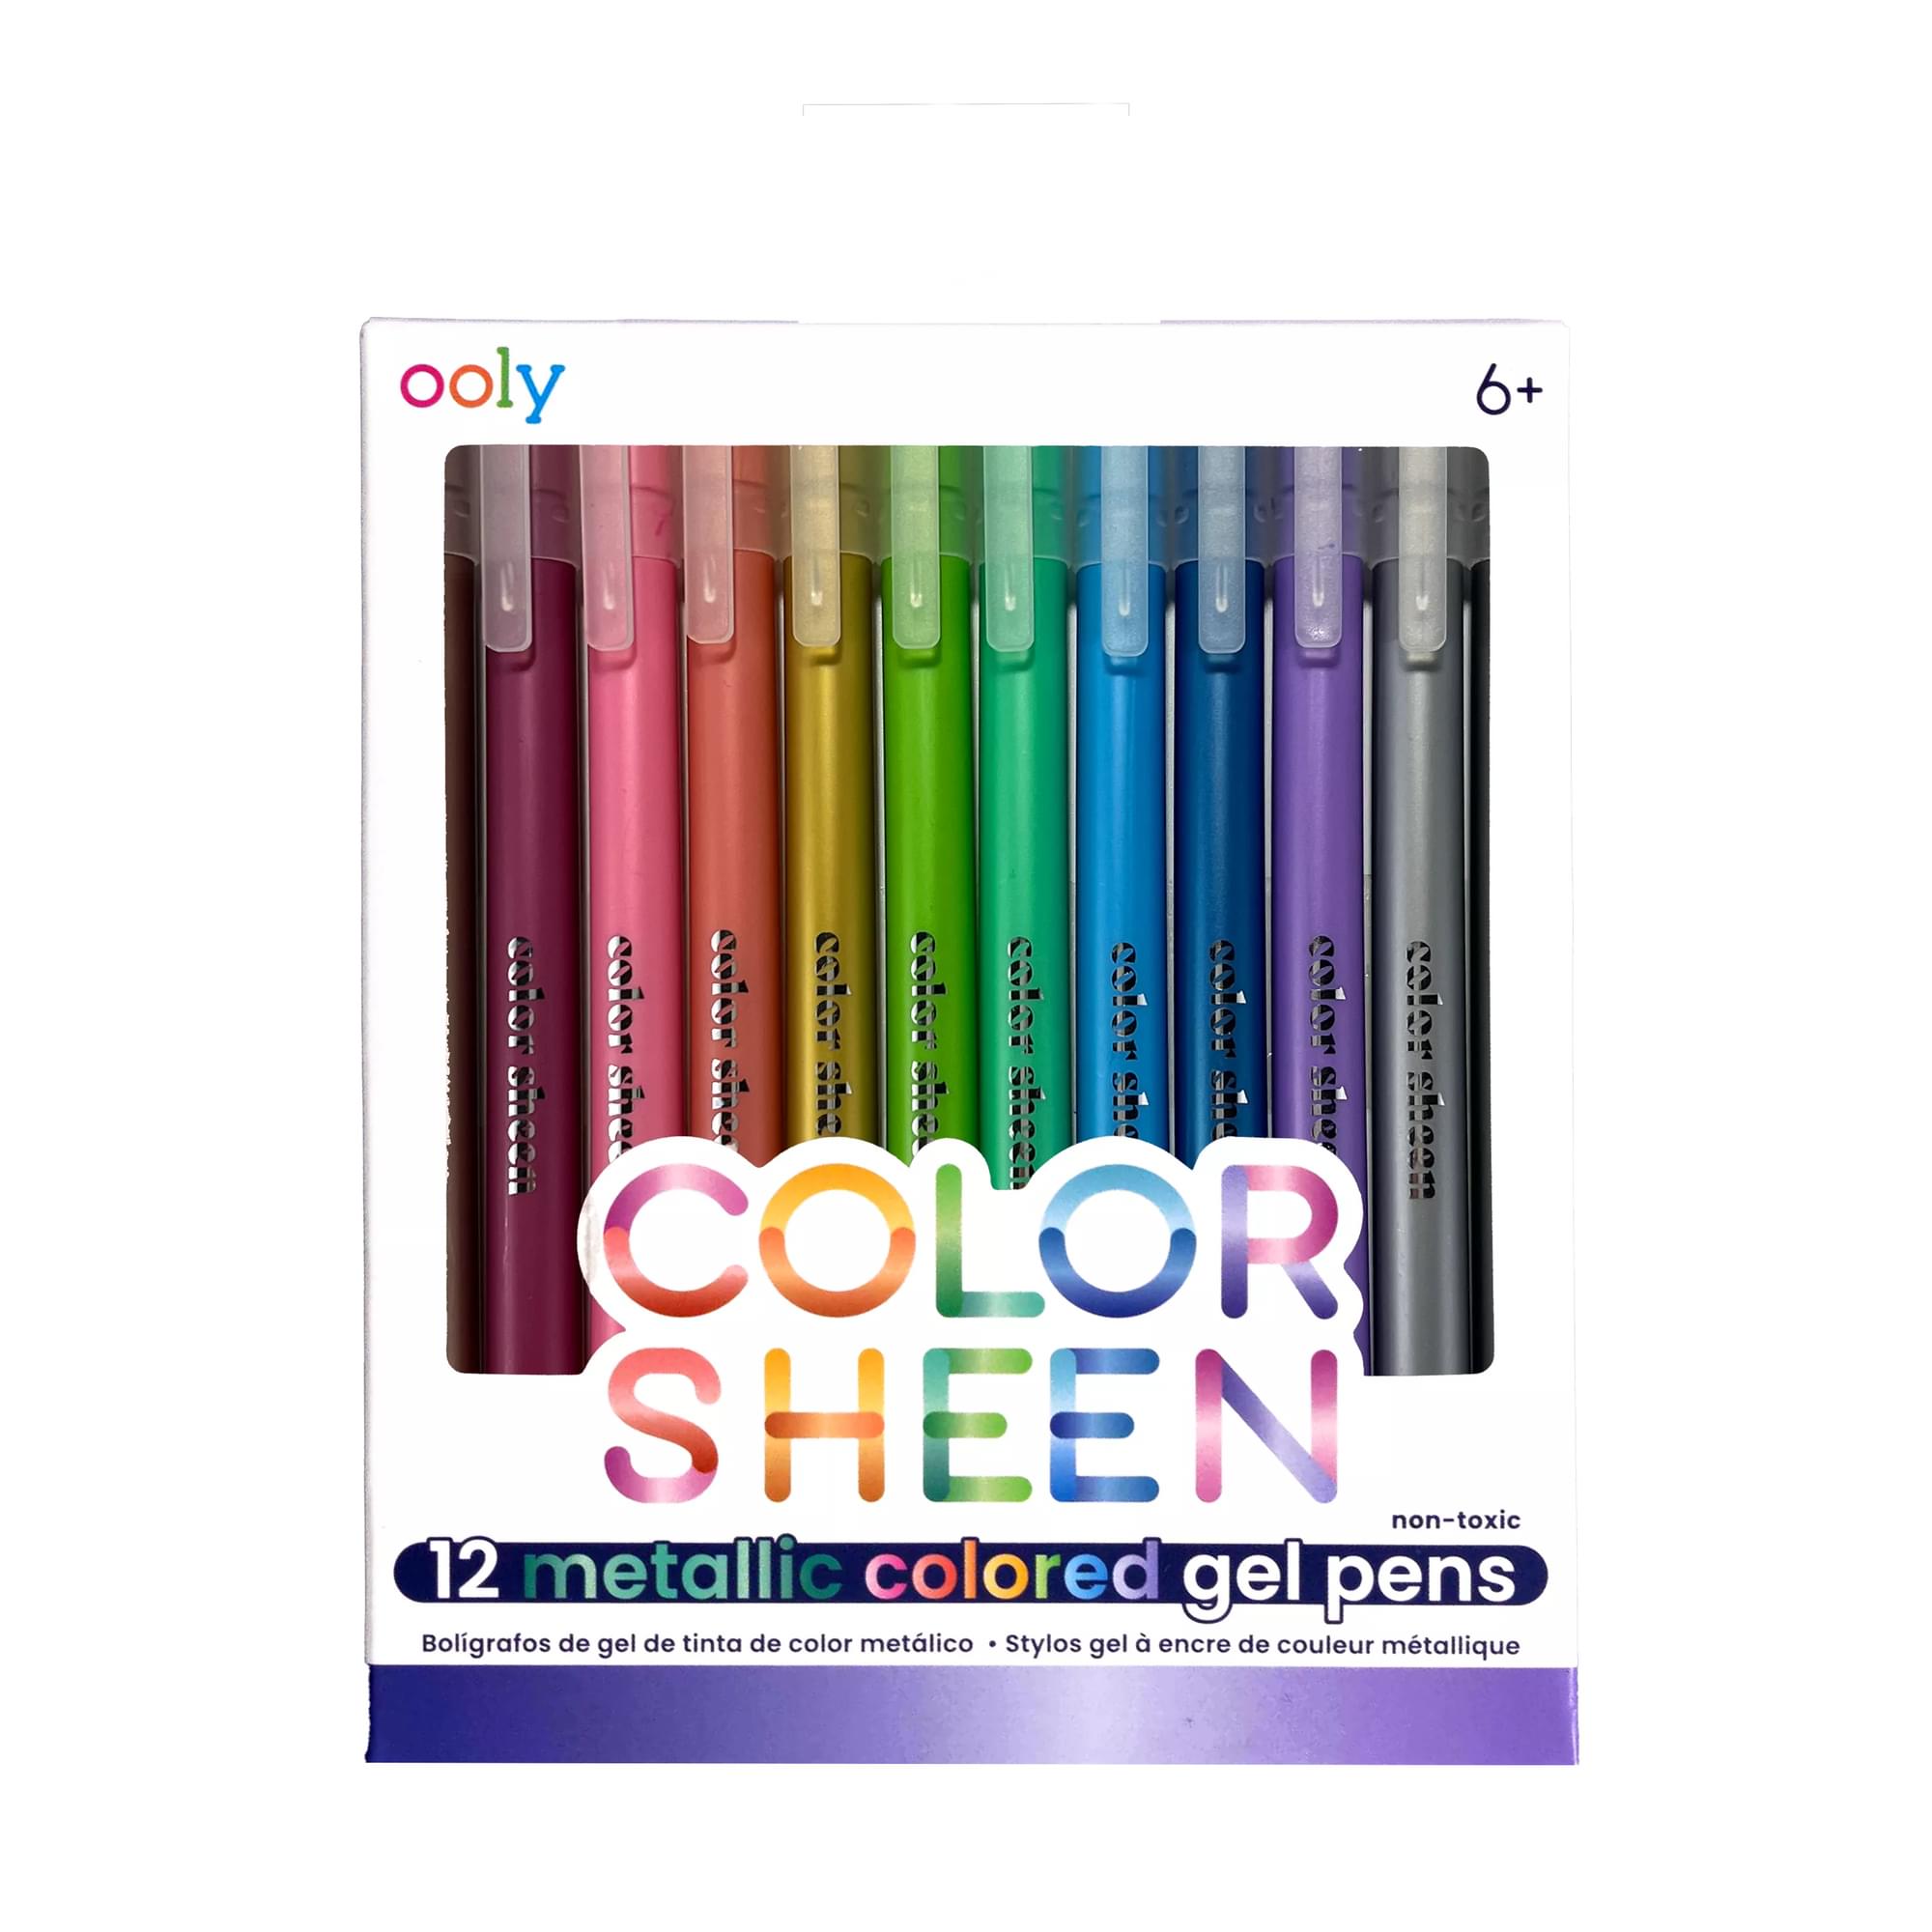 Multicolor Pens - 24 Pack of 6-in-1 Retractable Ballpoint Pens - 6 Vivid  Colors in Every Pen - Best for Smooth Writing - By Hieno 